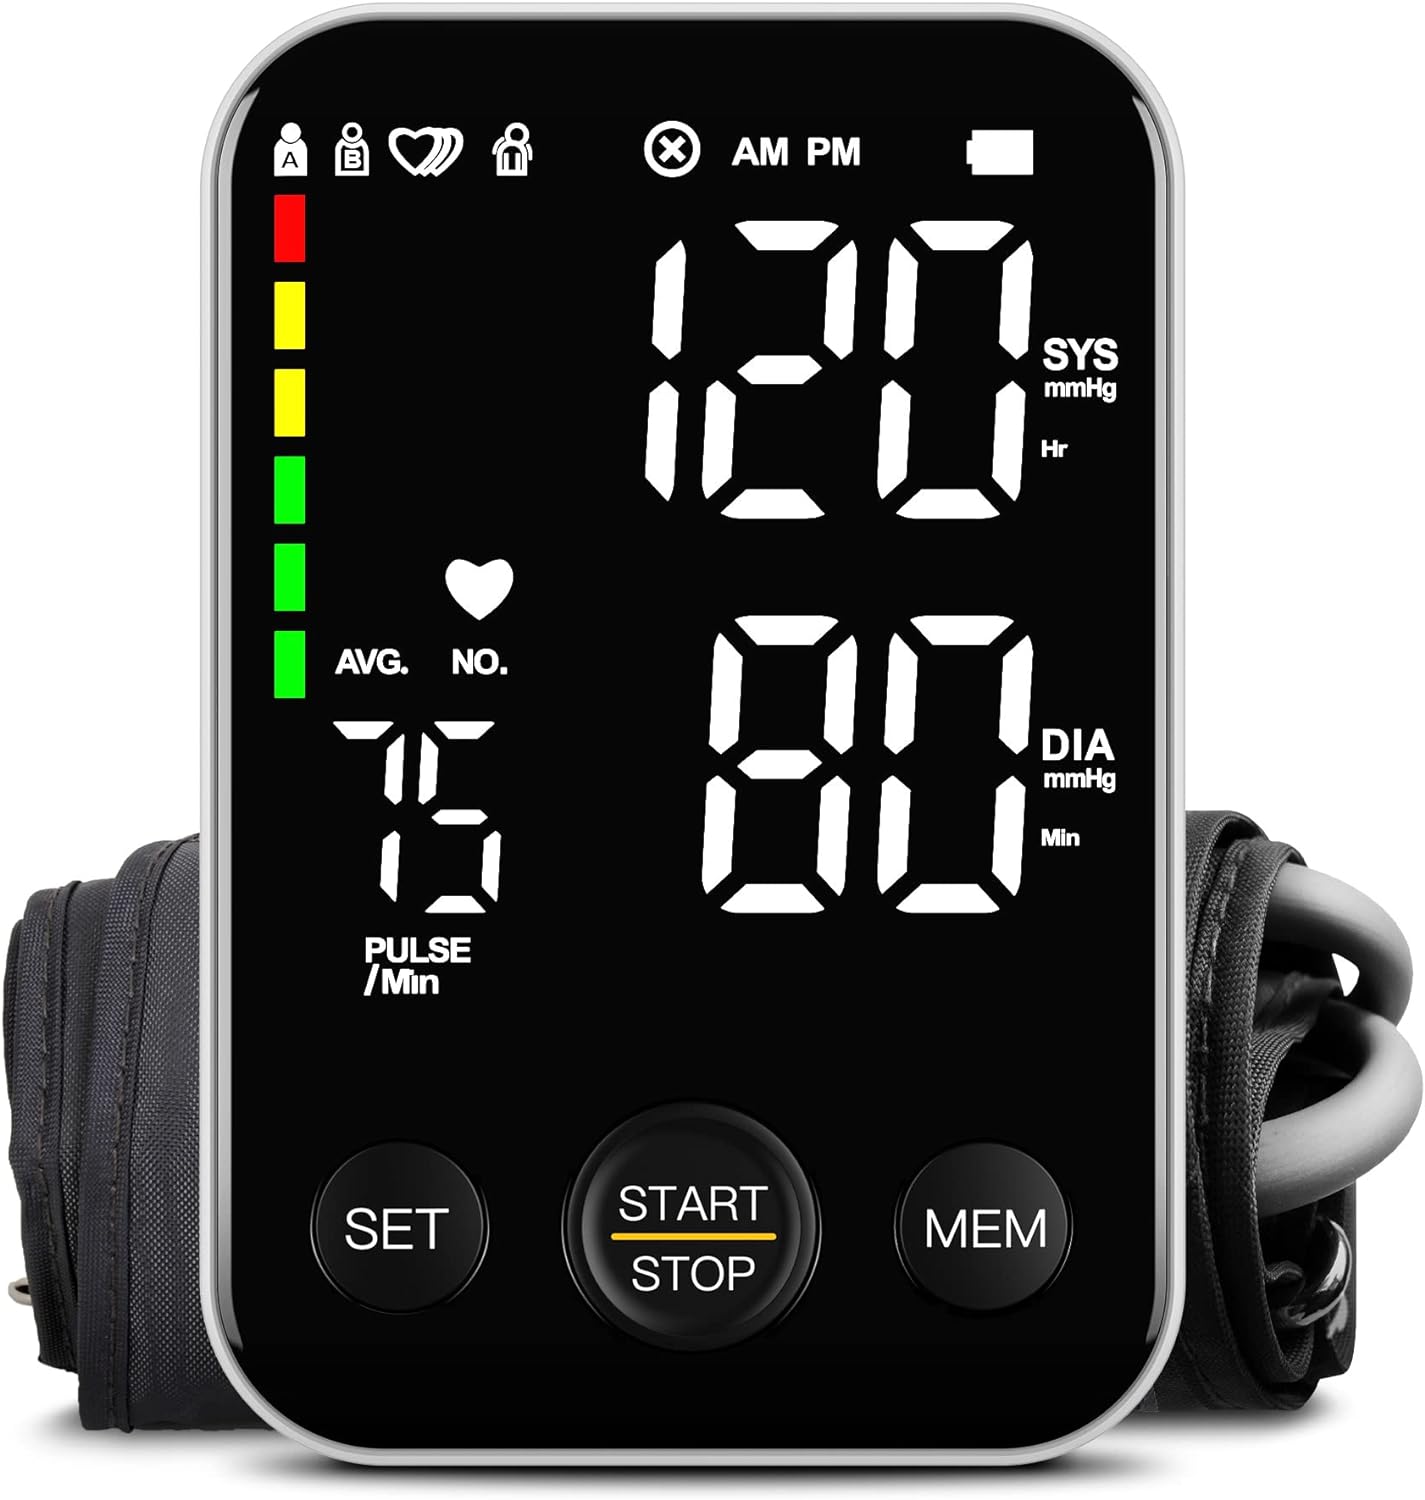 Blood Pressure Monitor Upper Arm Blood Pressure Monitors for Home Use BP Machine with 2x120 Reading Memory Adjustable Arm Cuff 8.7-15.7 Large Display with LED Background Light Storage Bag